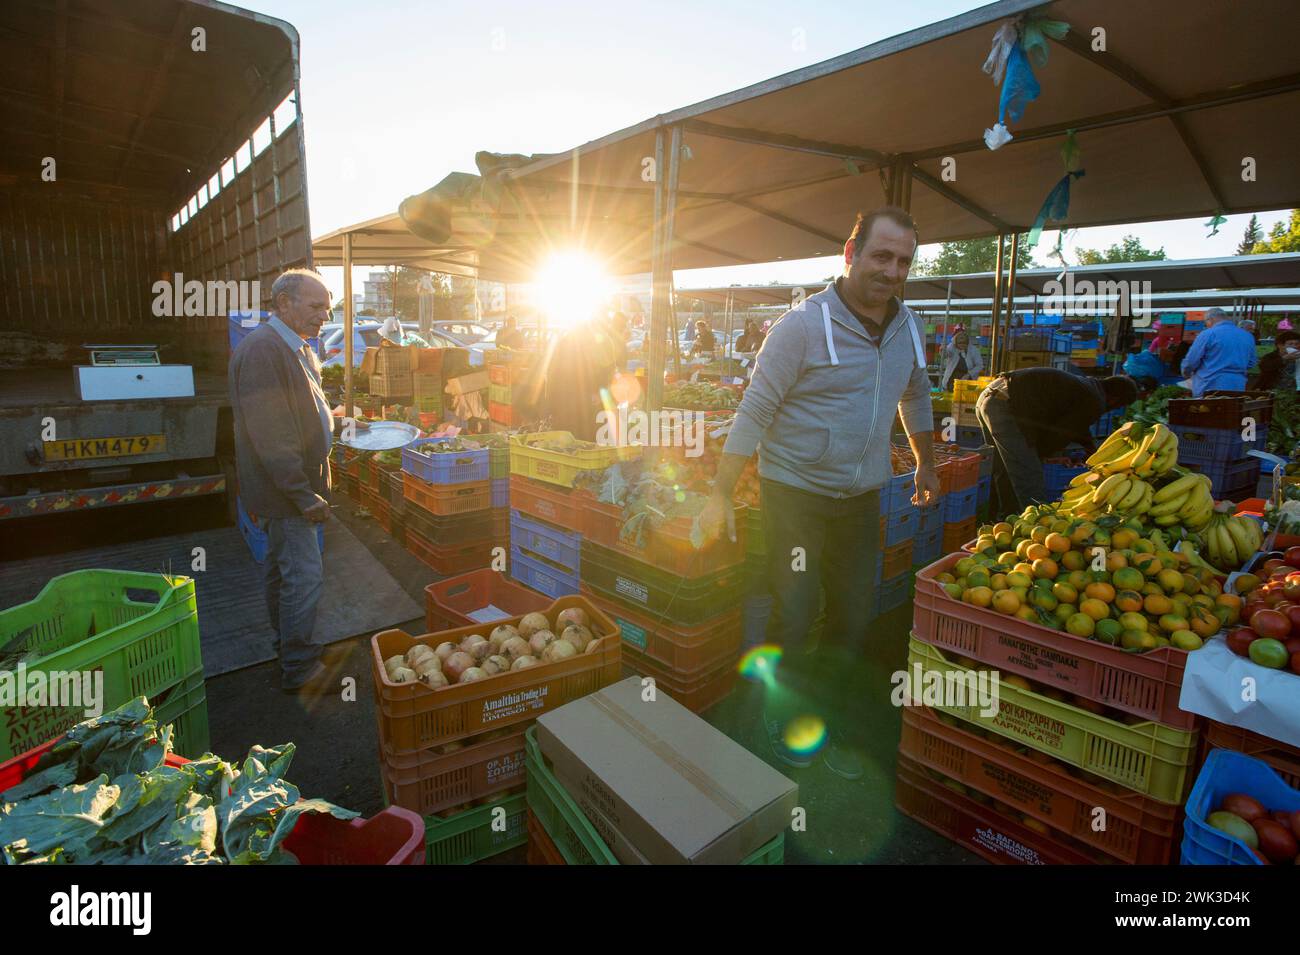 Market day on the Constanza Bastion of the Venetian city walls of Nicosia. Traders set up their stalls. Stock Photo